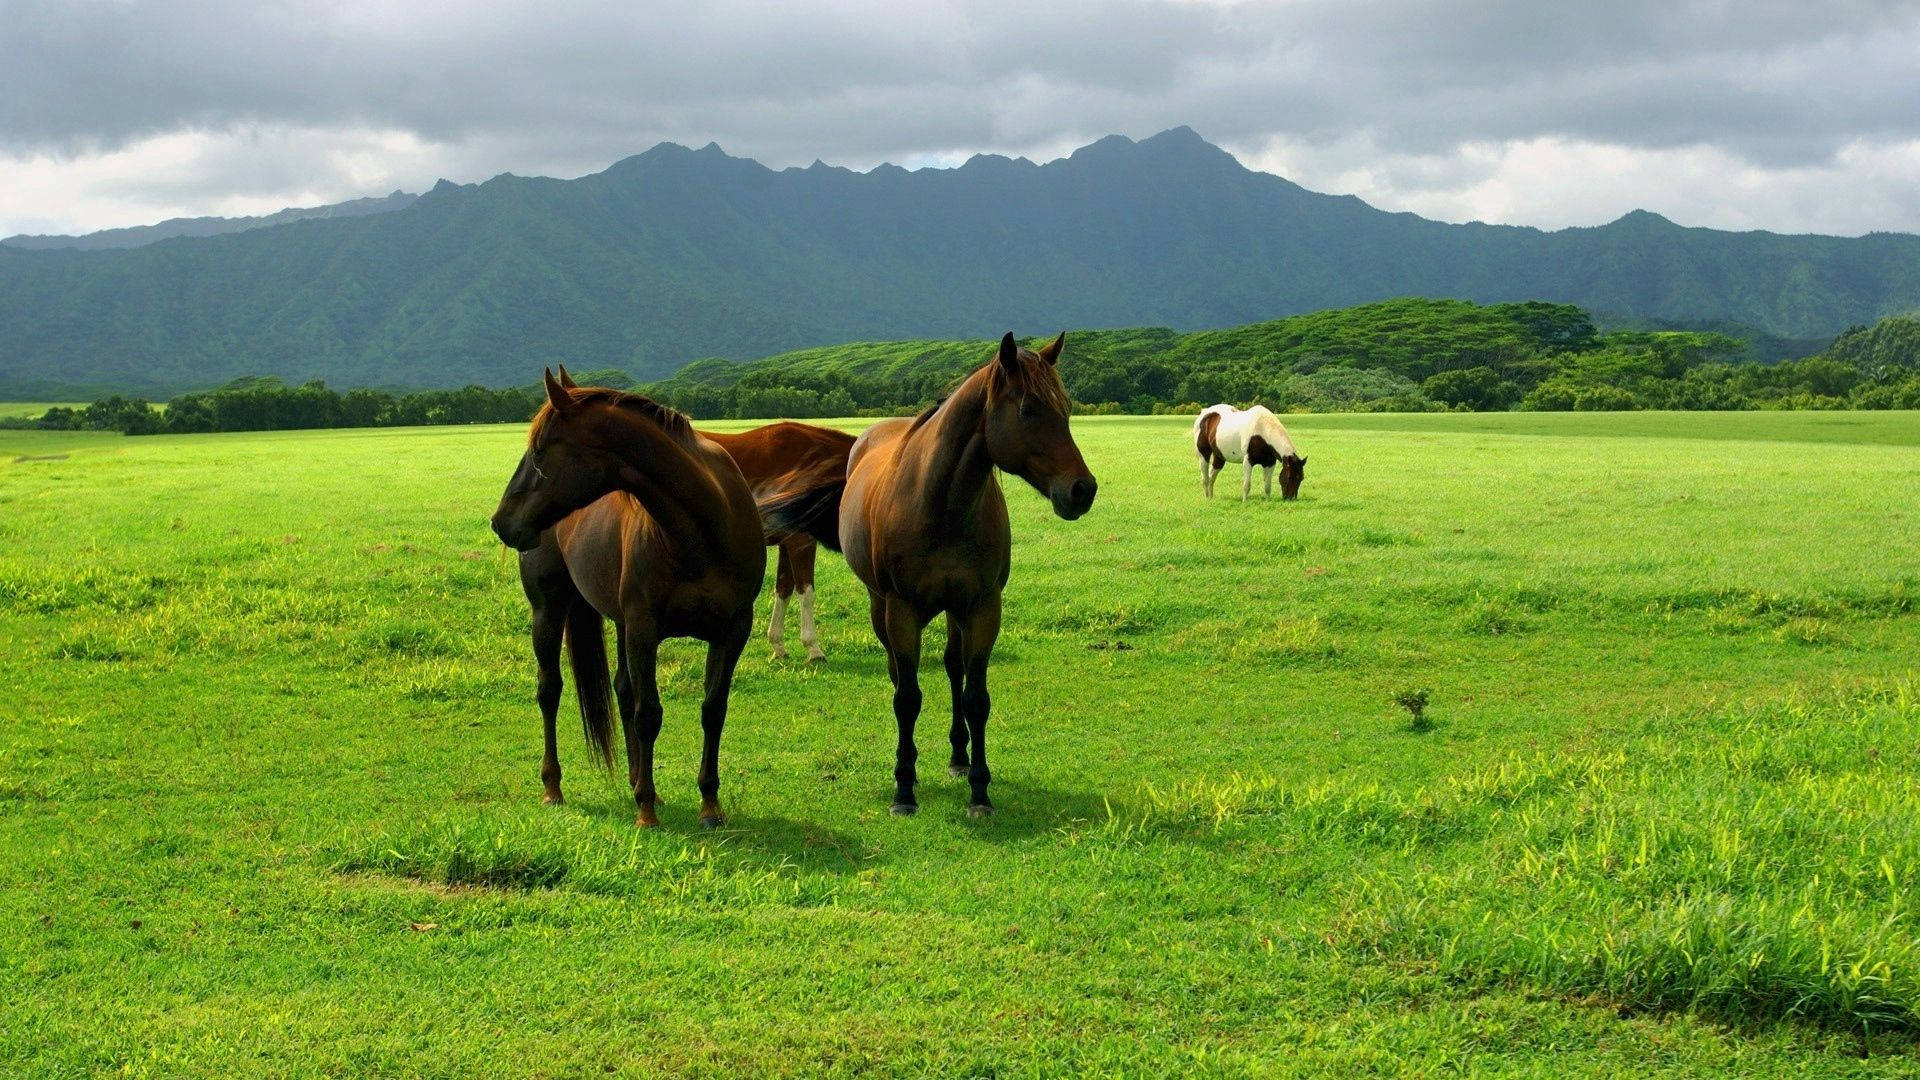 A Look Into the Wild: Horses Strolling in the Prairie Wallpaper